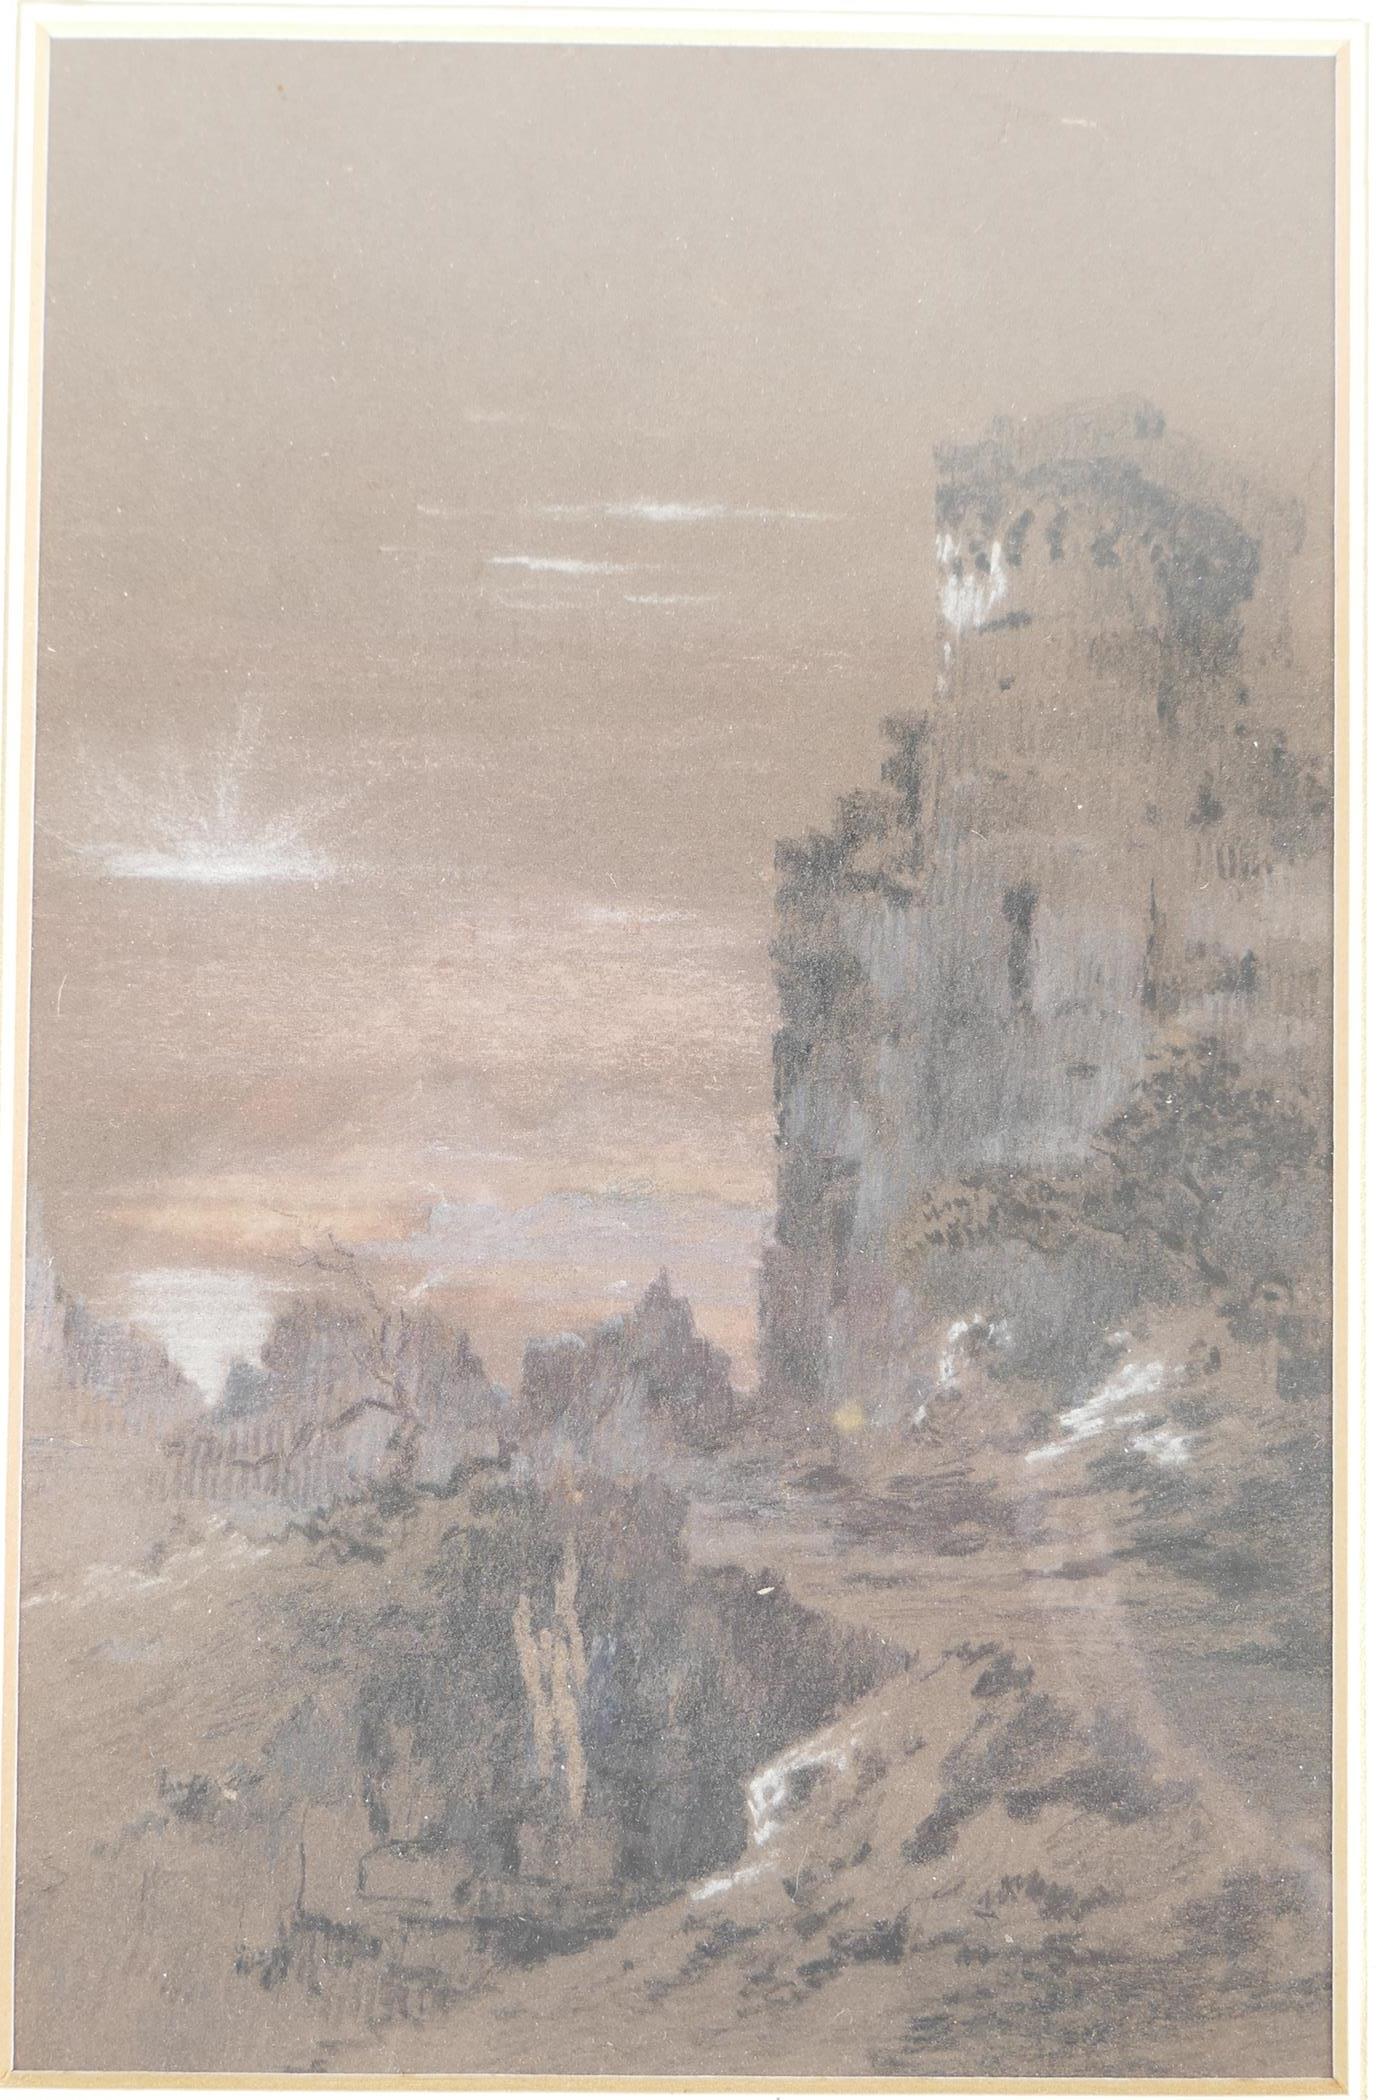 Ruins in a landscape at sunset, C19th charcoal drawing highlighted with white, in the manner of John - Image 2 of 3